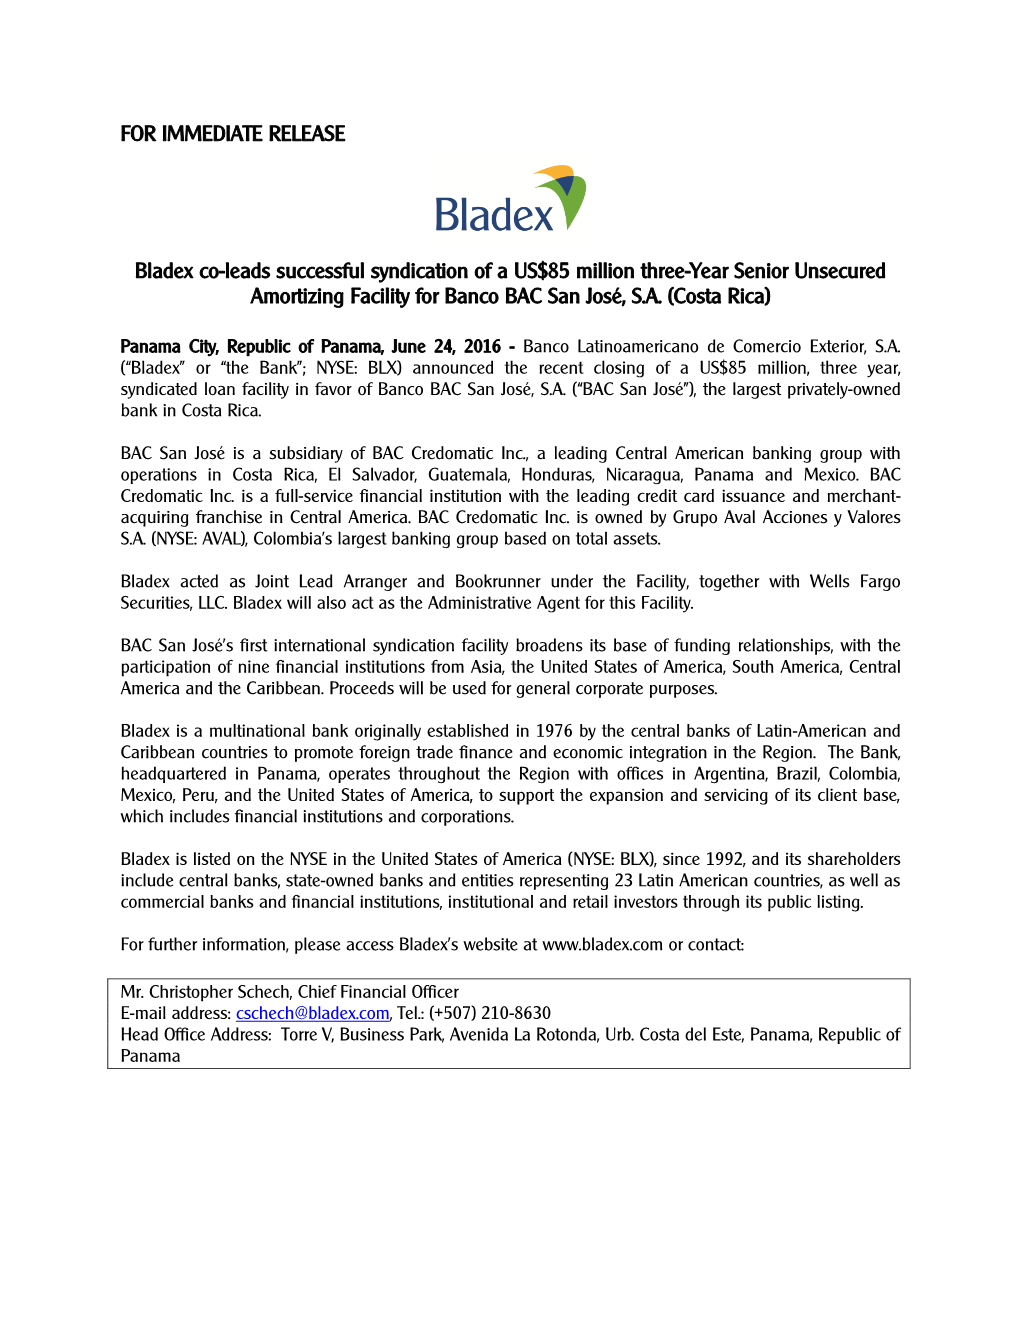 Bladex Co-Leads Successful Syndication of a US$85 Million Three-Year Senior Unsecured Amortizing Facility for Banco BAC San José, S.A